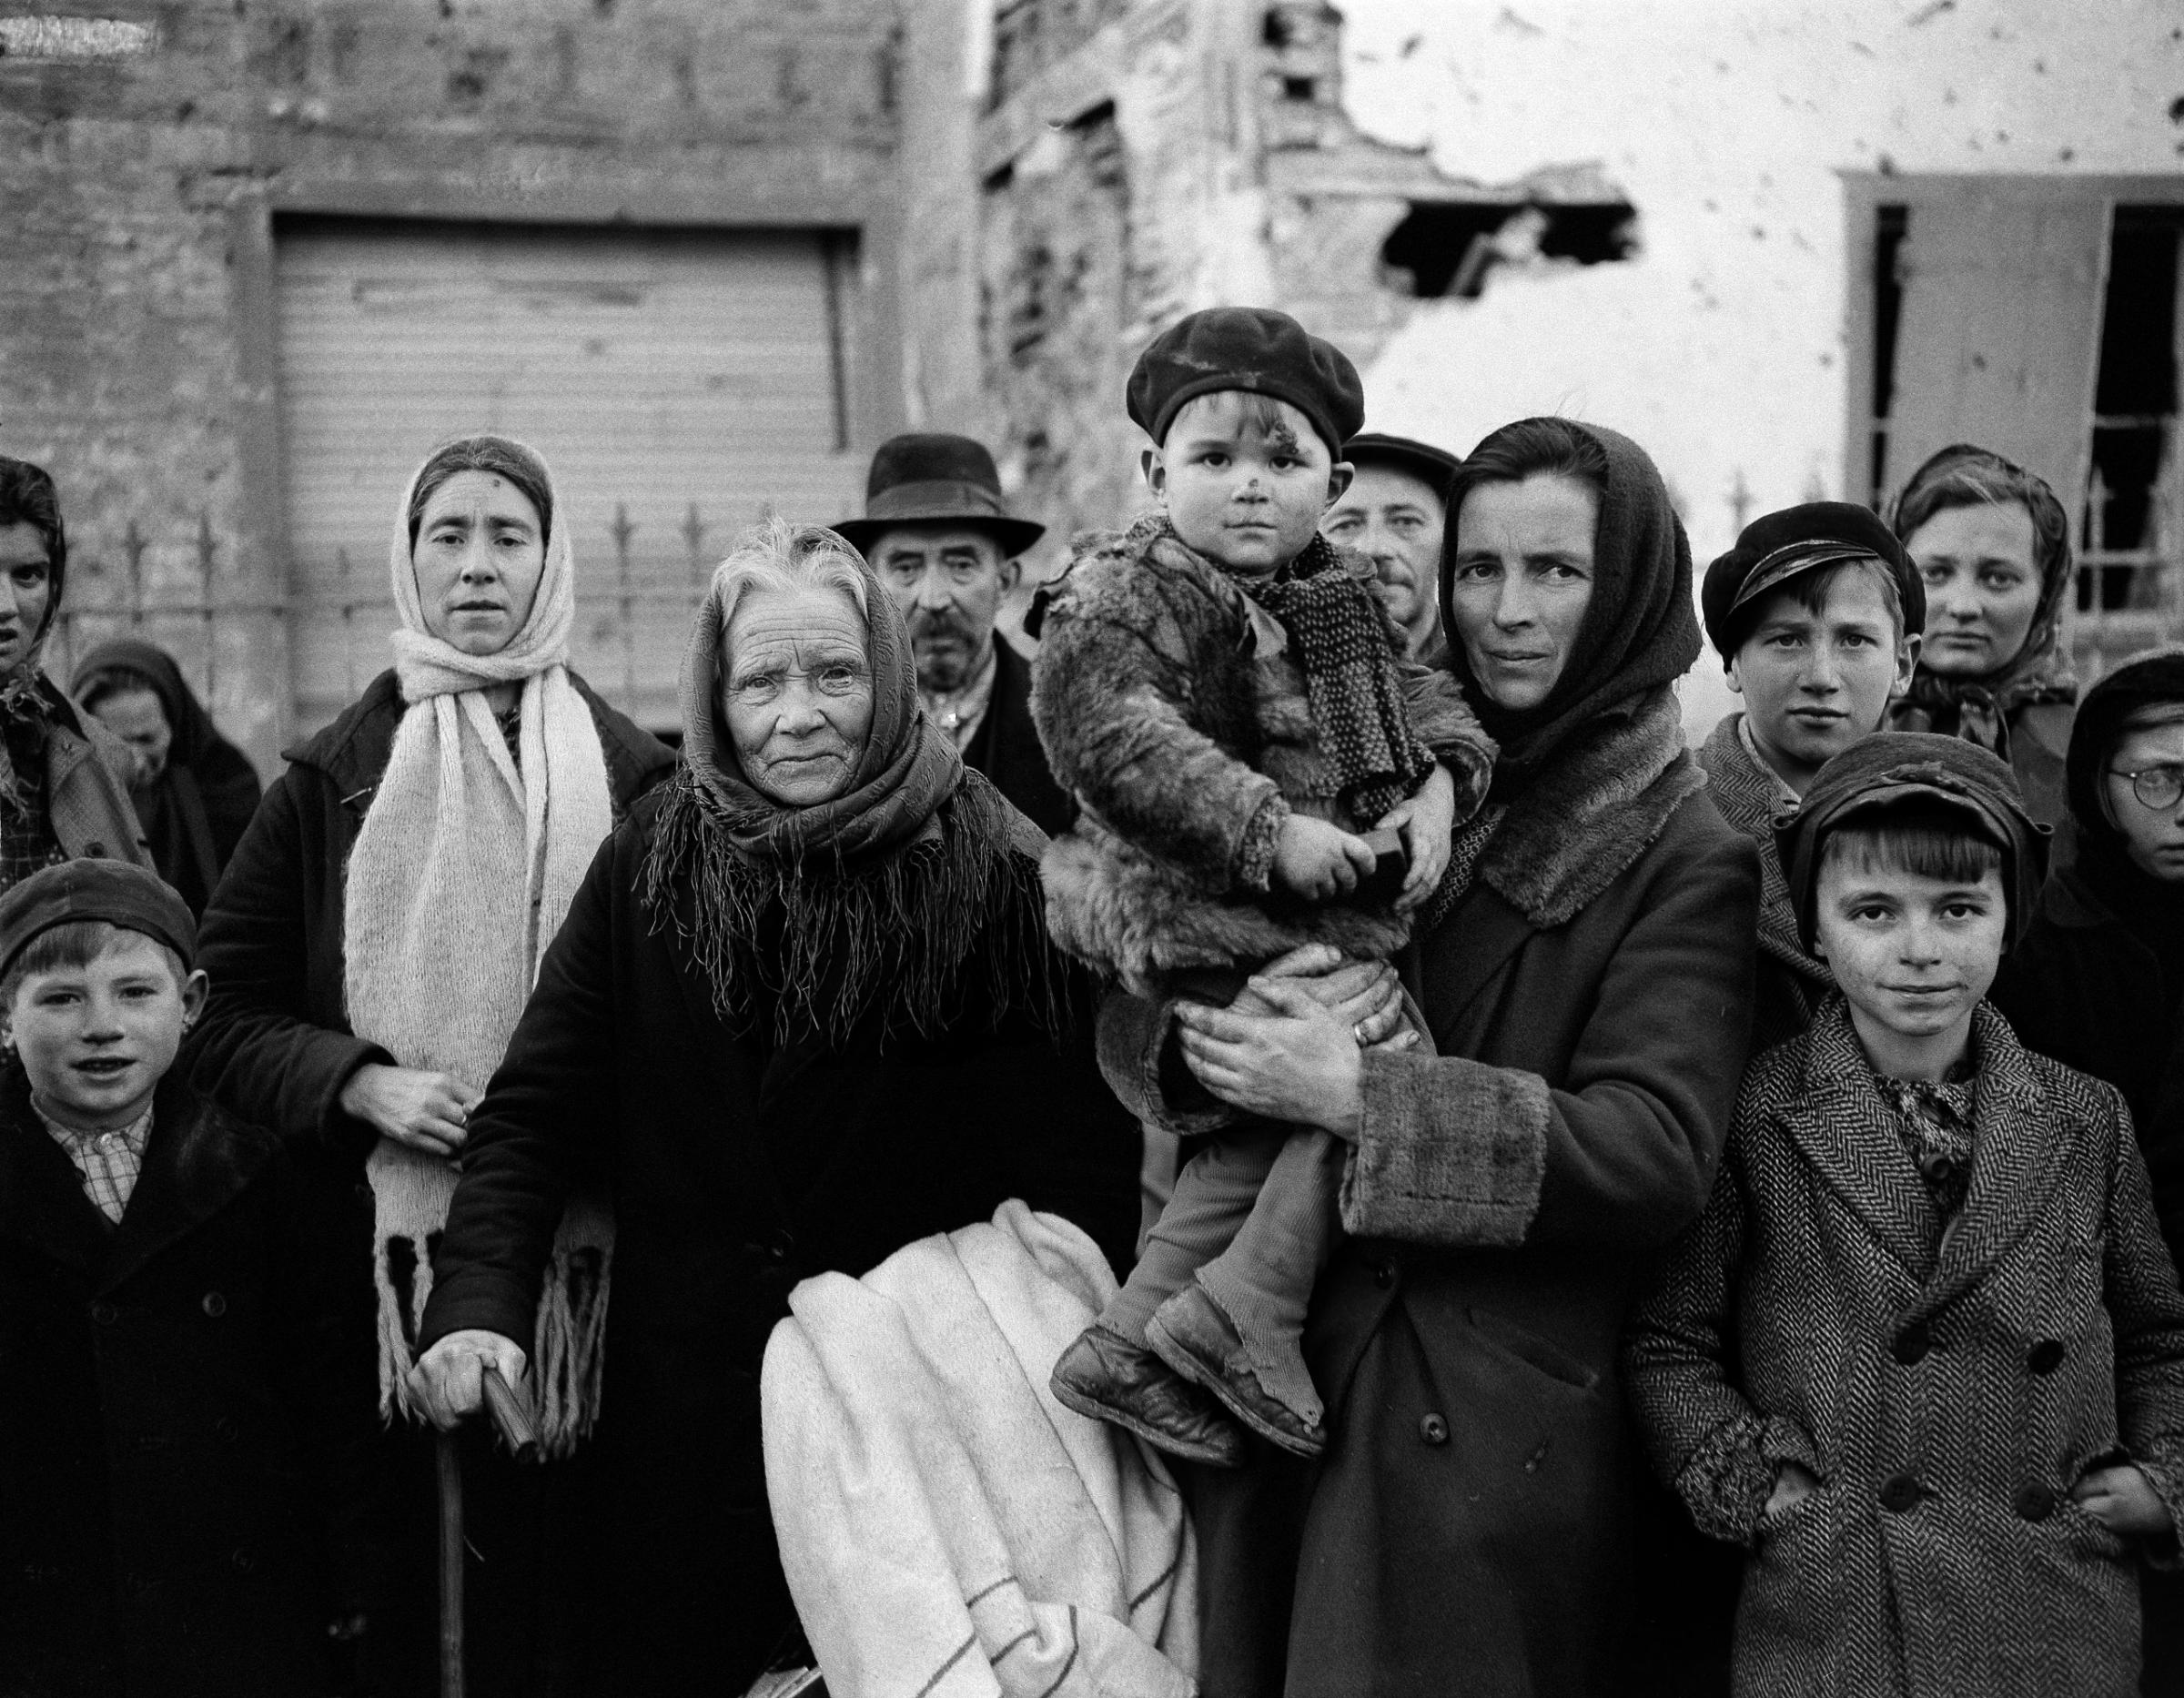 Grim-faced refugees stand in a group on a street in La Gleize, Belgium on Jan. 2, 1945. They are waiting to be transported from the war-torn town after its recapture by American forces during the German thrust into the Belgium-Luxembourg salient.